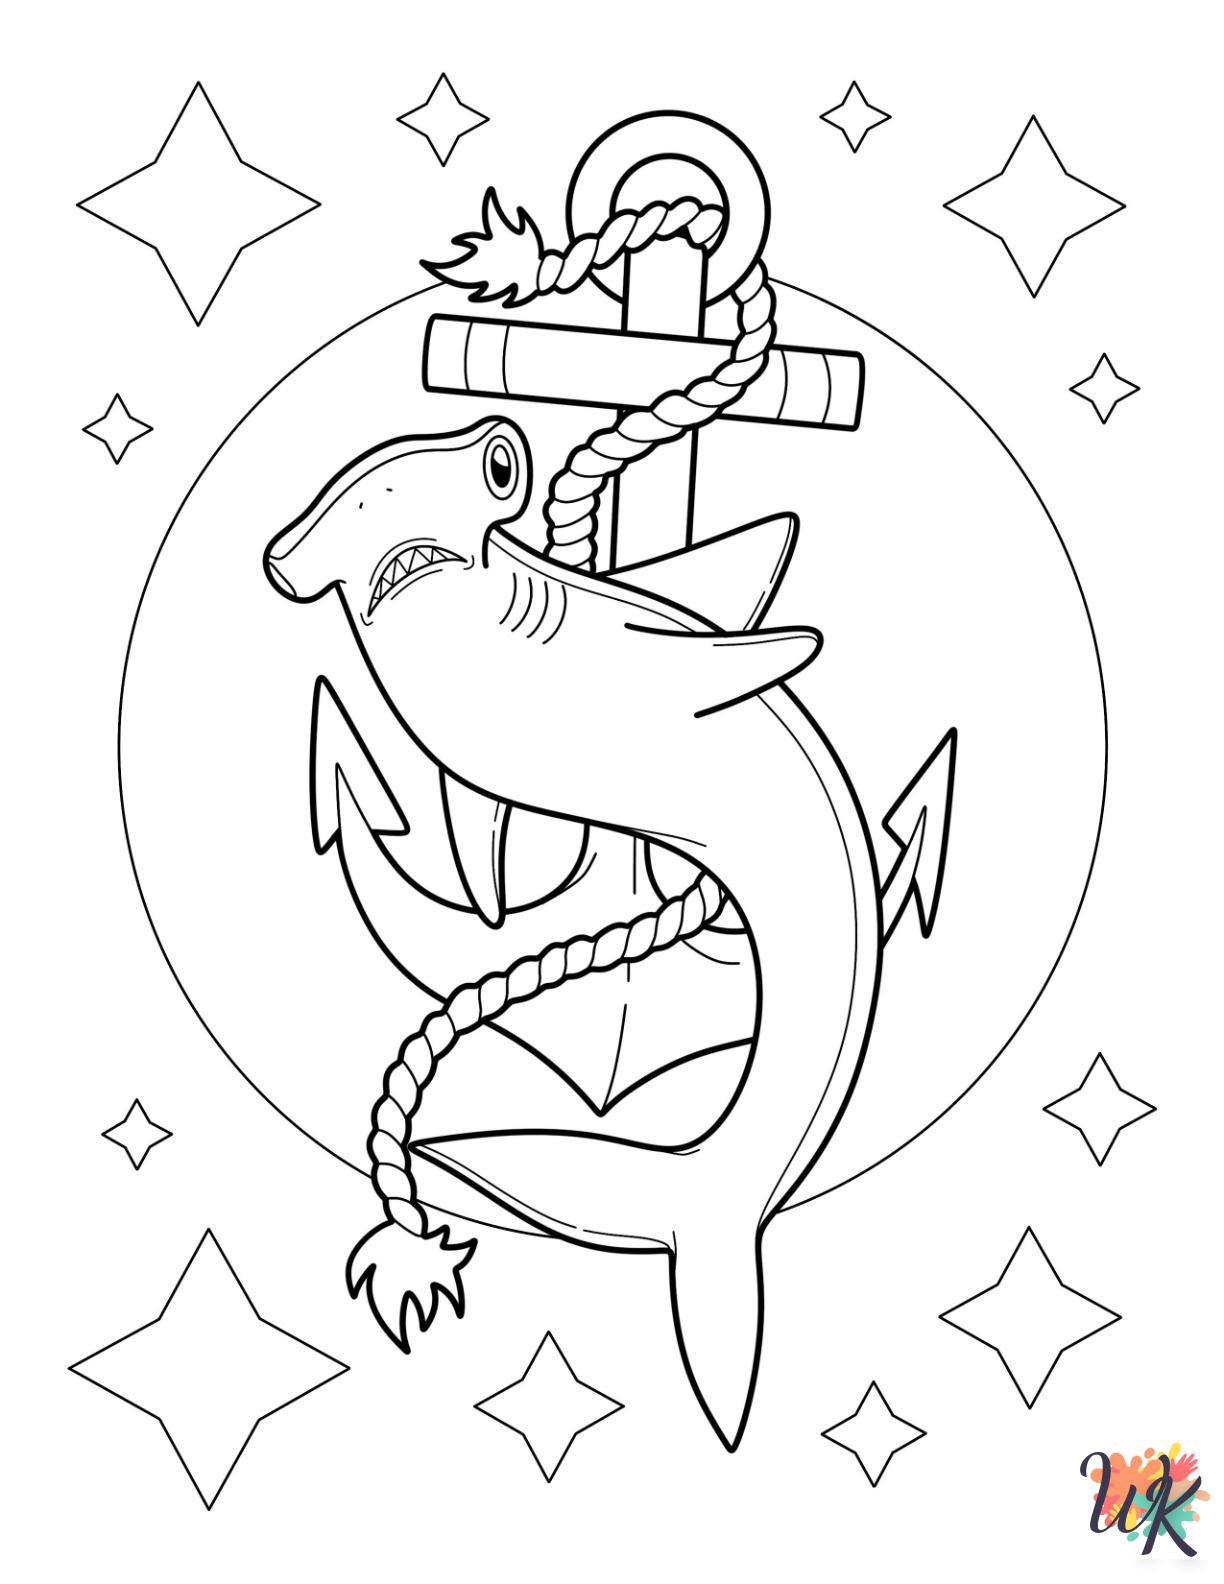 Hammerhead Shark coloring pages for adults pdf